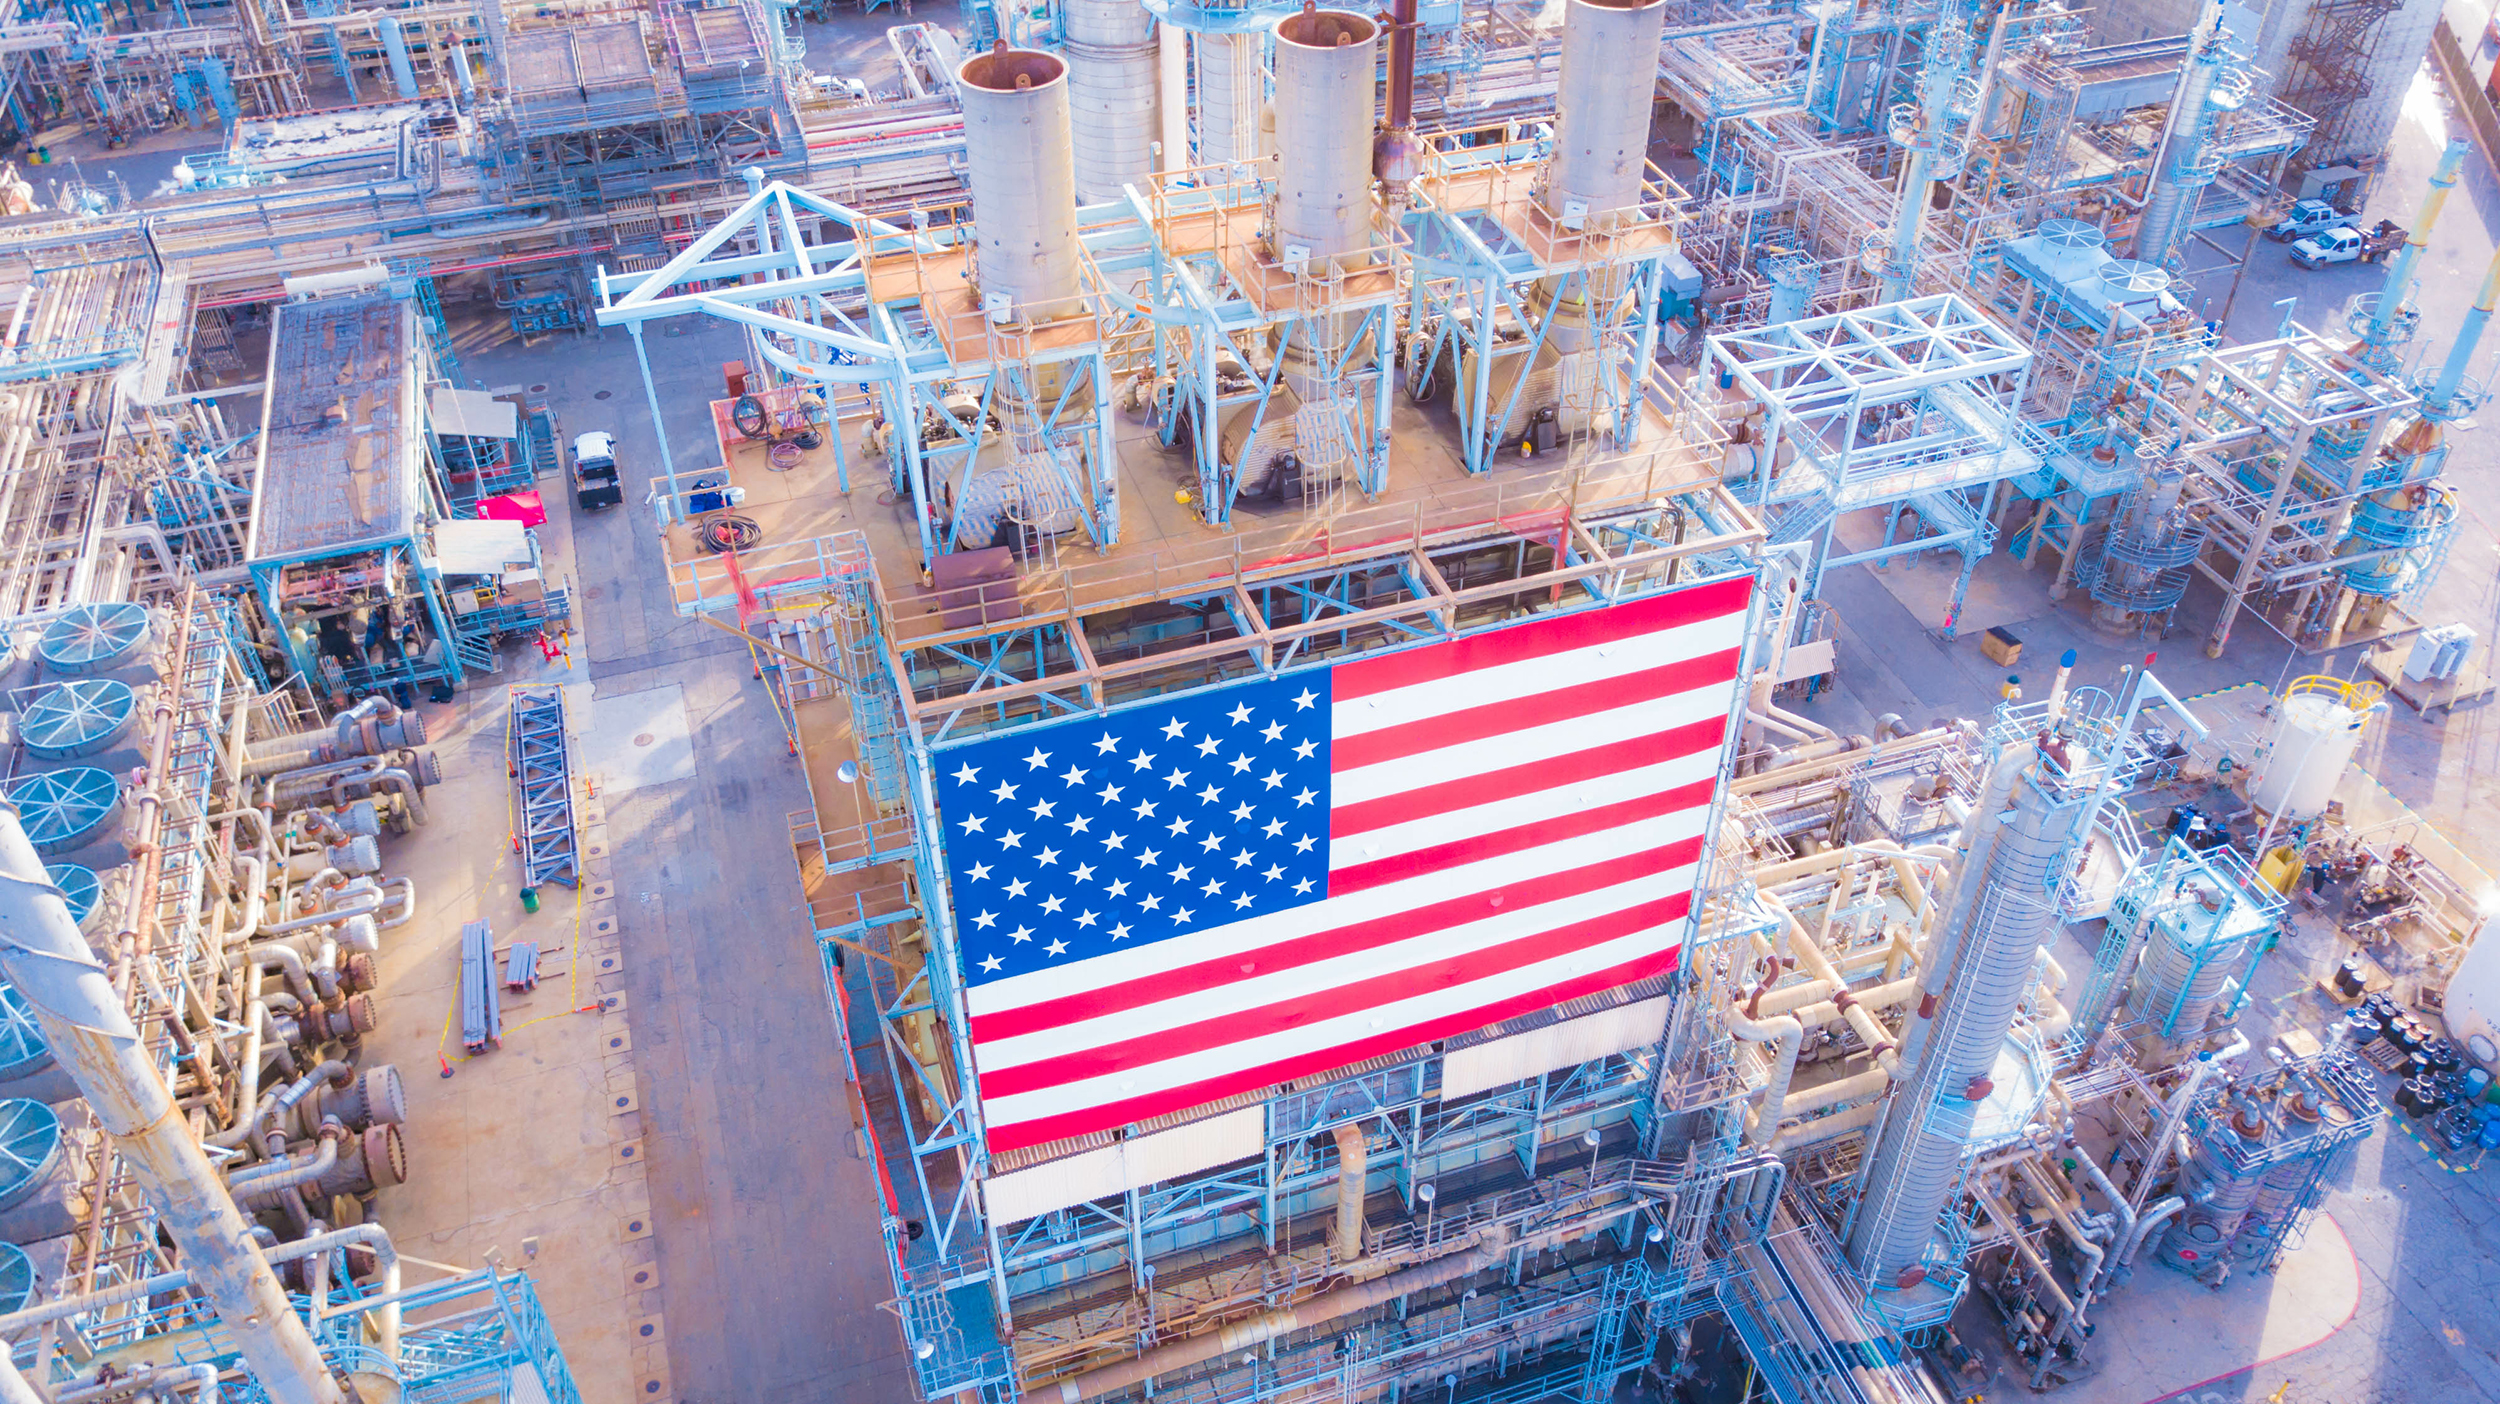 Oil Refinery with American Flag in California